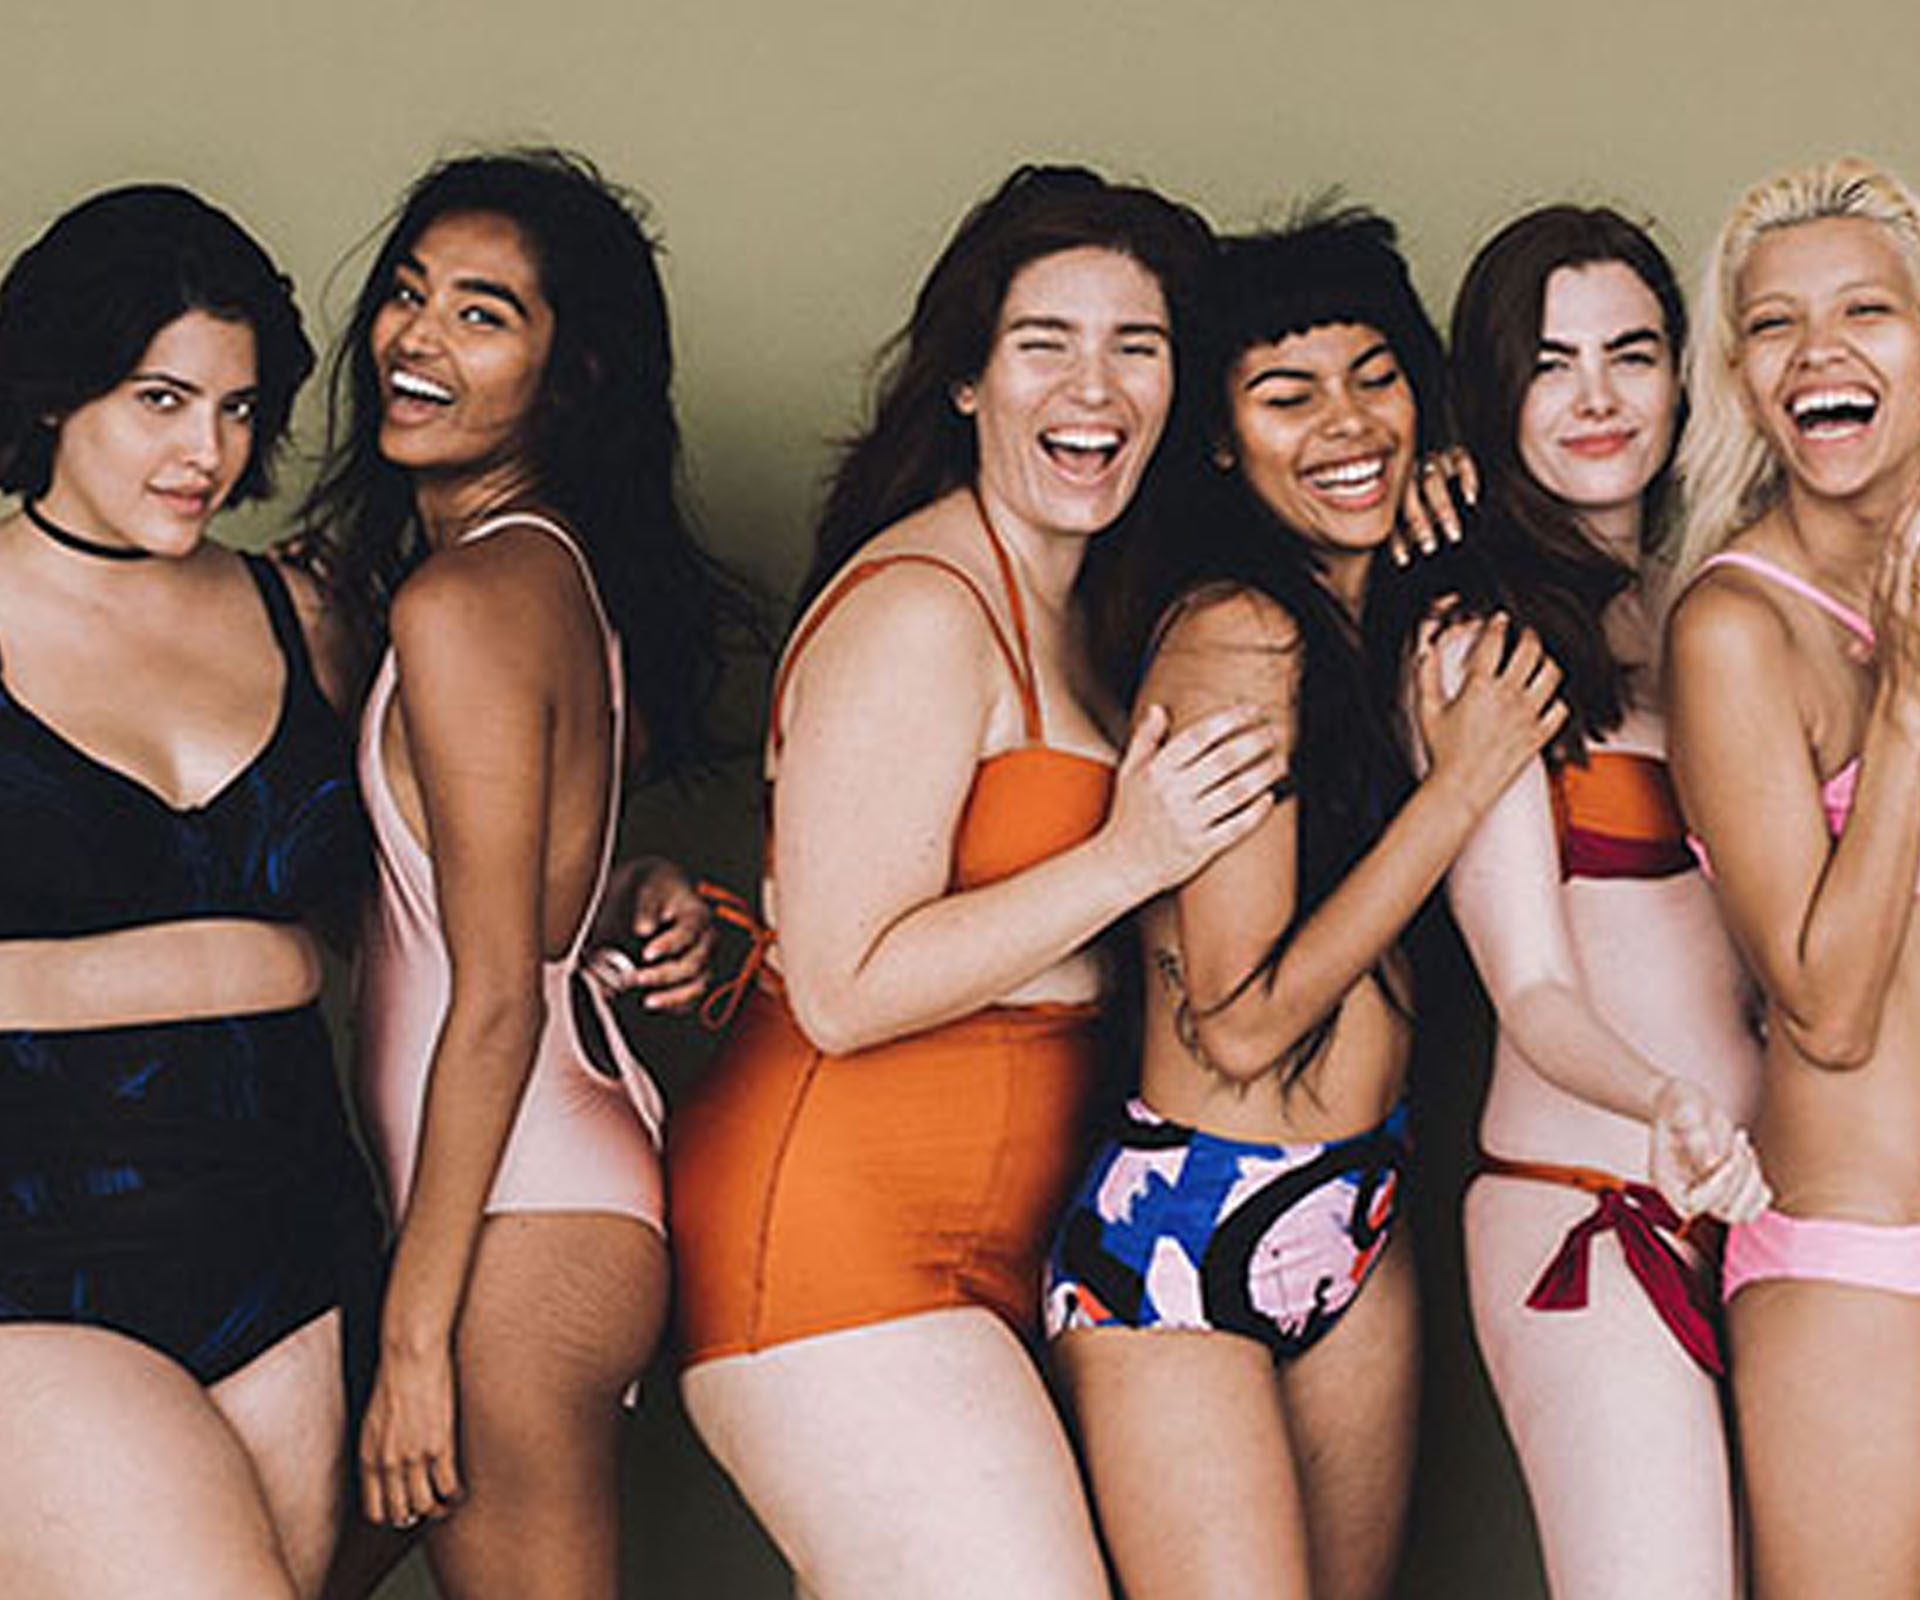 The I Am All Women Project is pushing for more diversity in the fashion industry